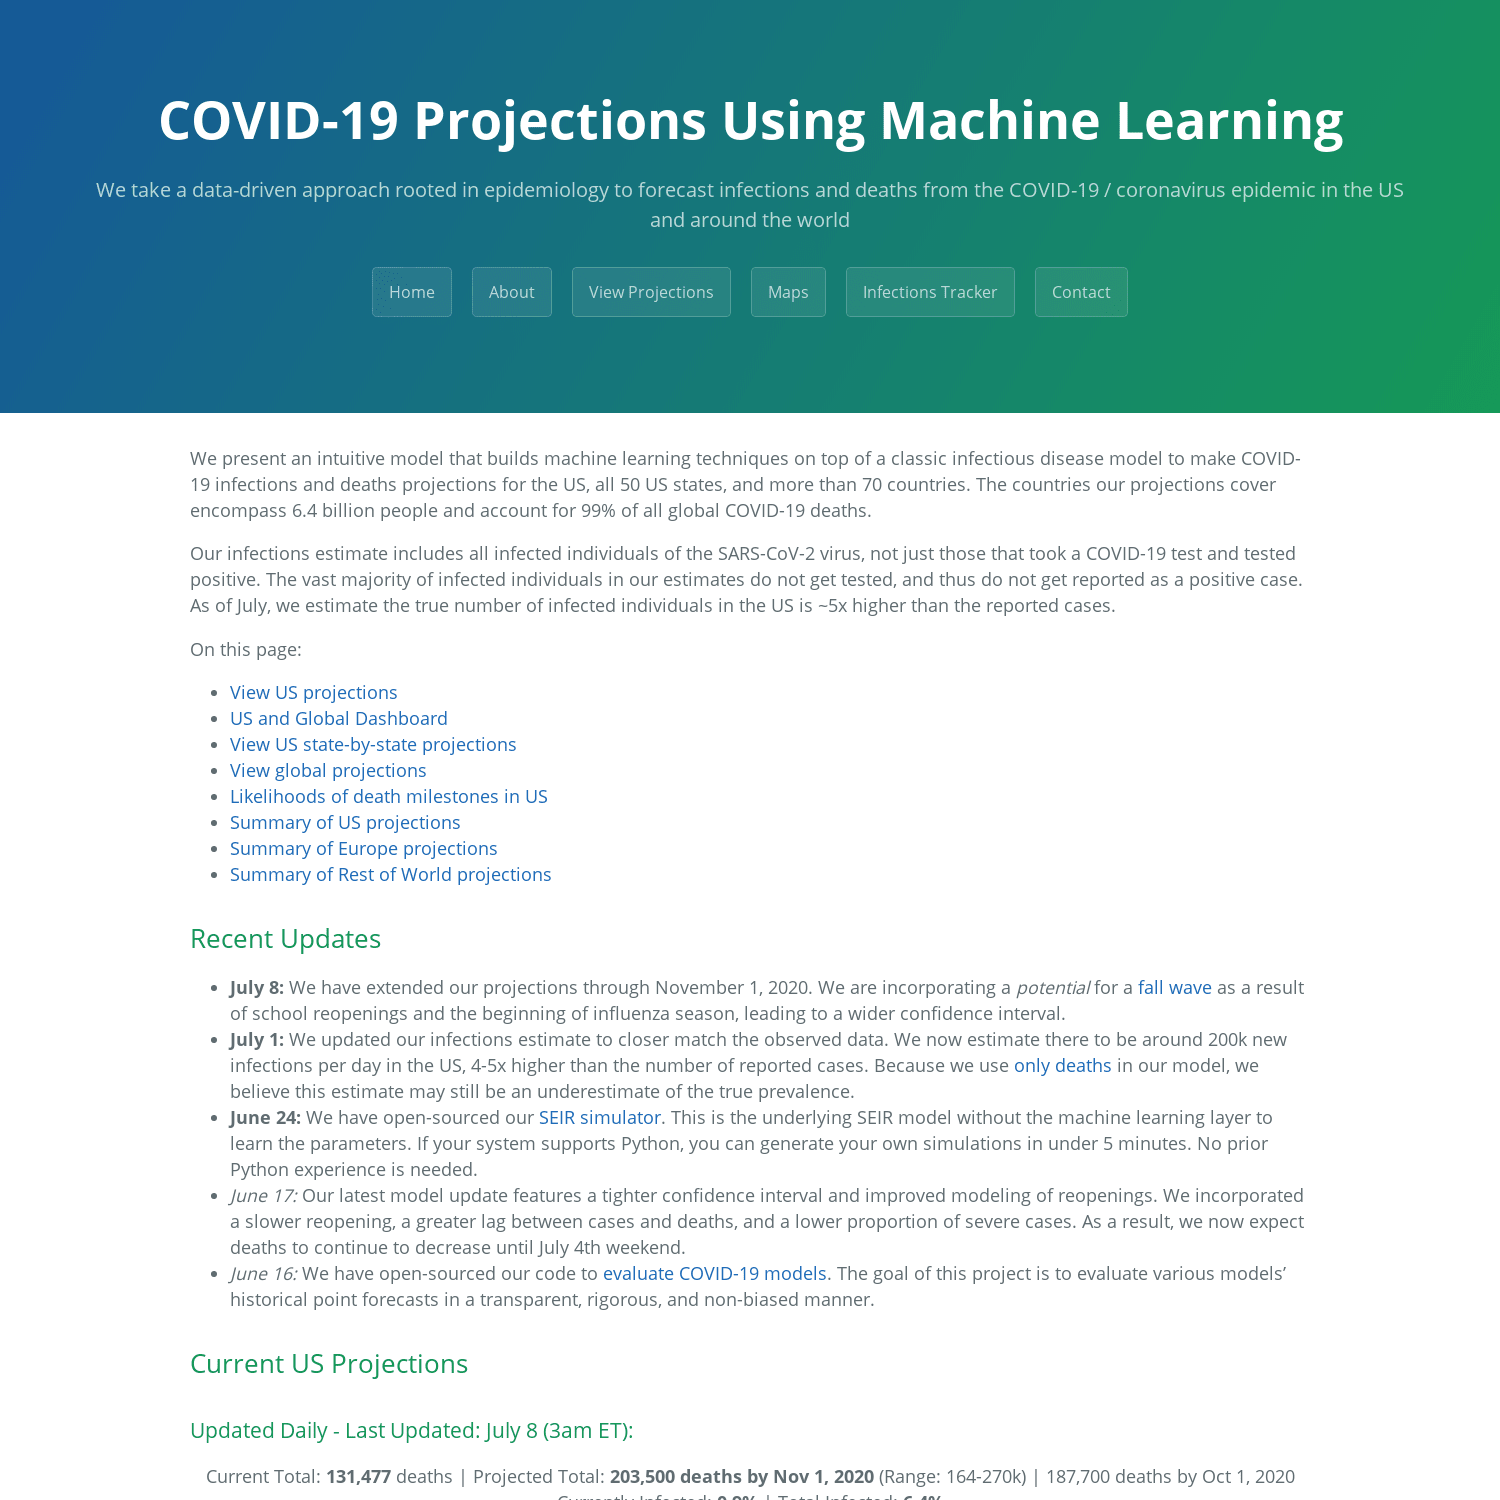 COVID-19 Projections Using Machine Learning